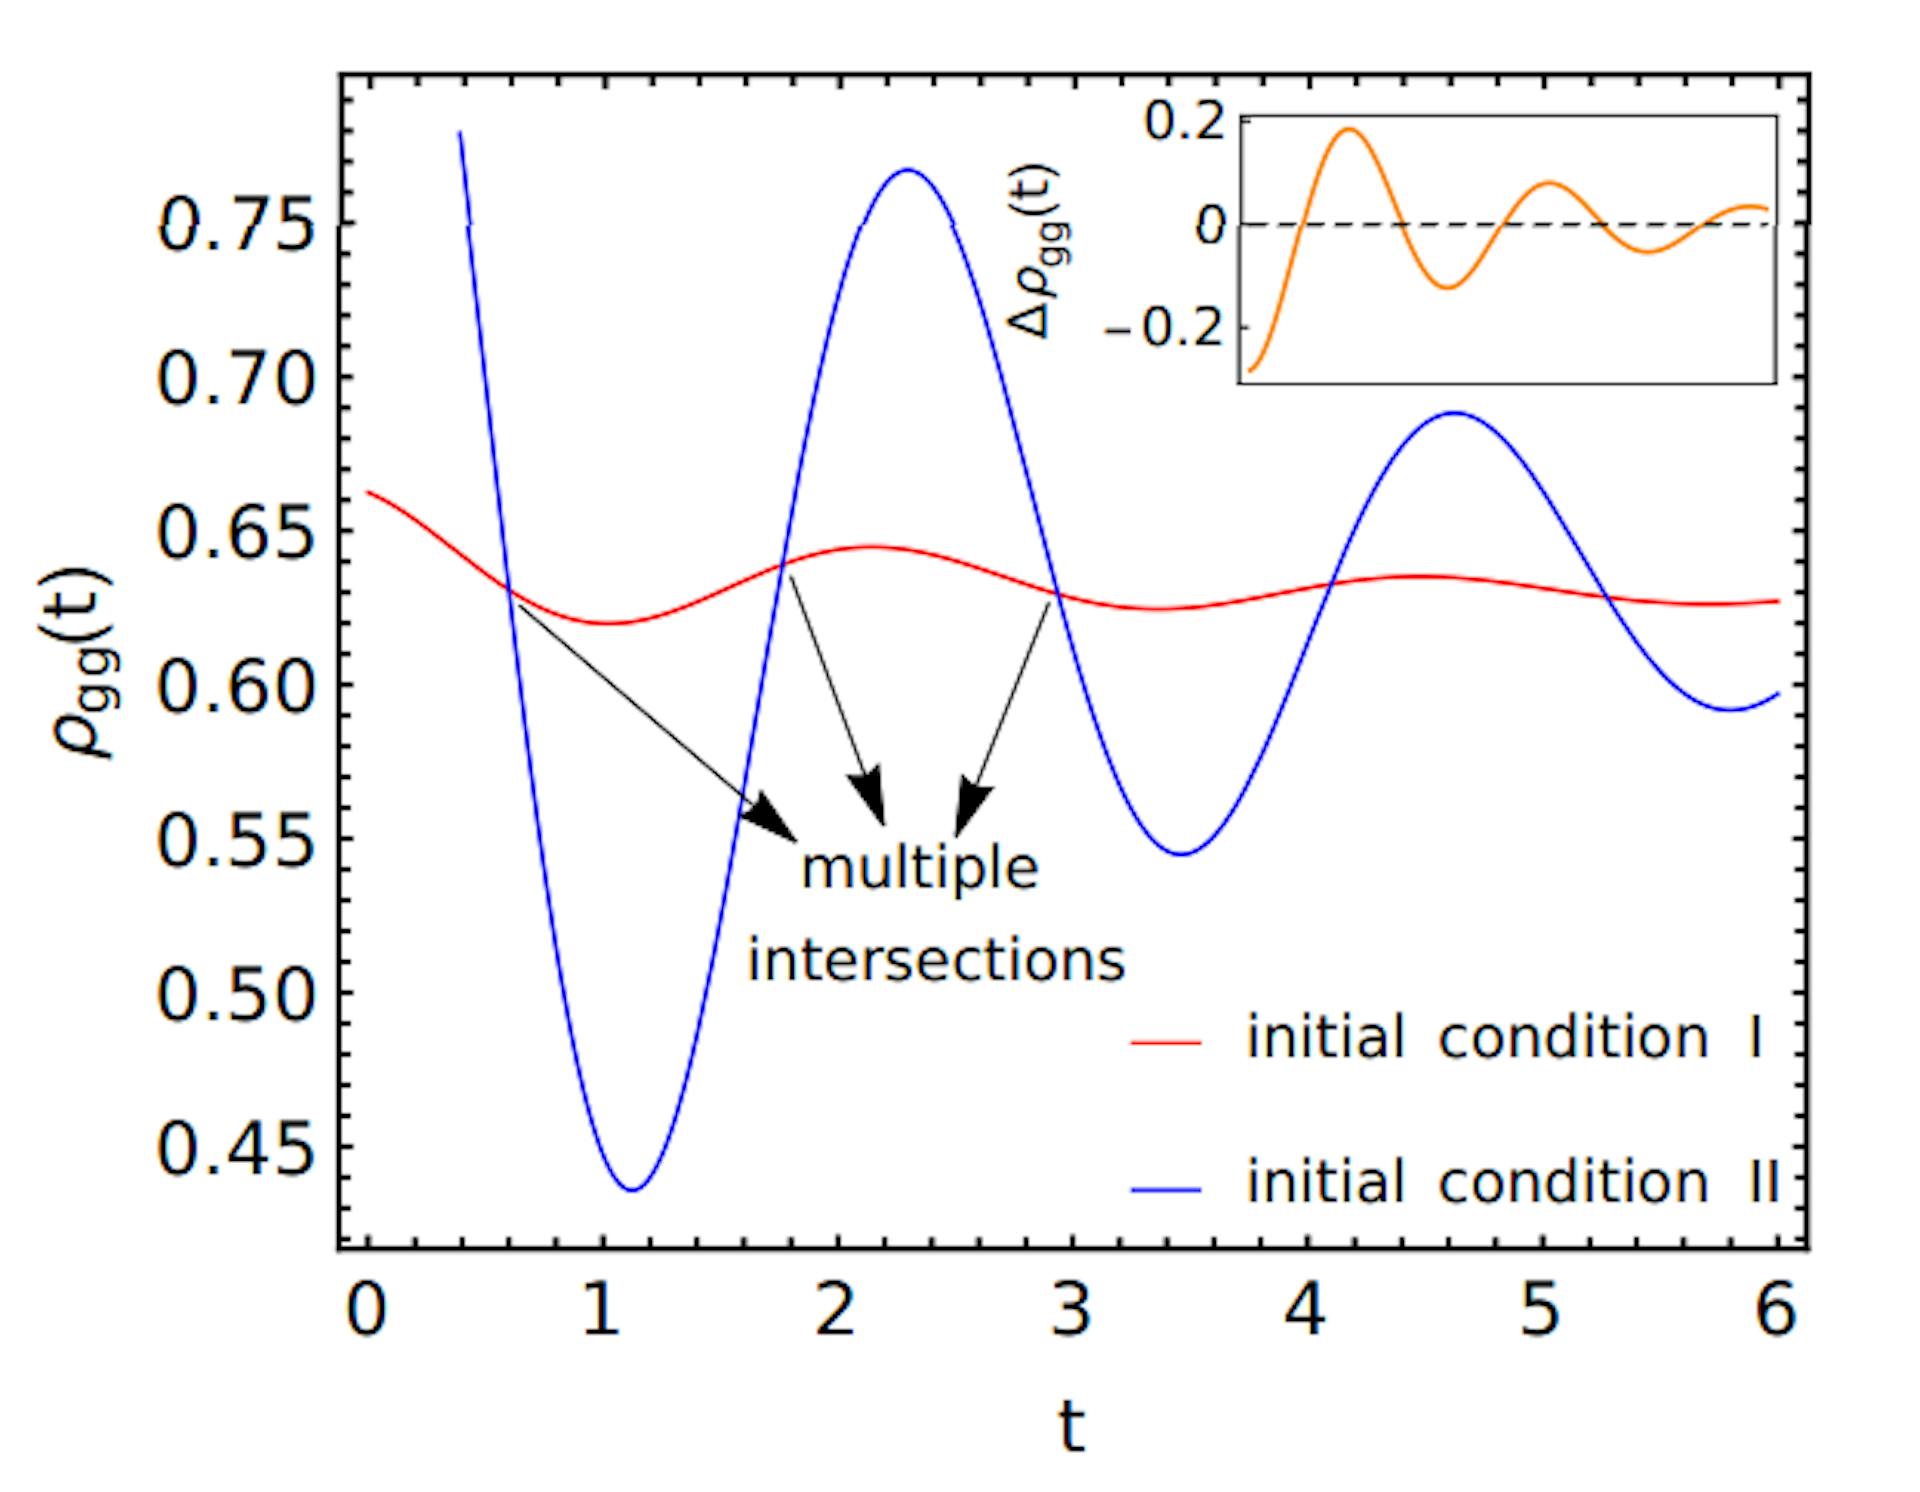 FIG. 7. The figure shows multiple QMPE in the ground state density matrix element, where both copies I and II exhibit oscillatory relaxation and intersect each other multiple times. The inset shows the difference between the two copies intersect zero multiple times, confirming the presence of multiple QMPE. Parameters used are ˜d = 2.5, Γ˜I = Γ˜II = Γ = 0 ˜ .5, ˜dI = 2.1, d˜II = 0.51.